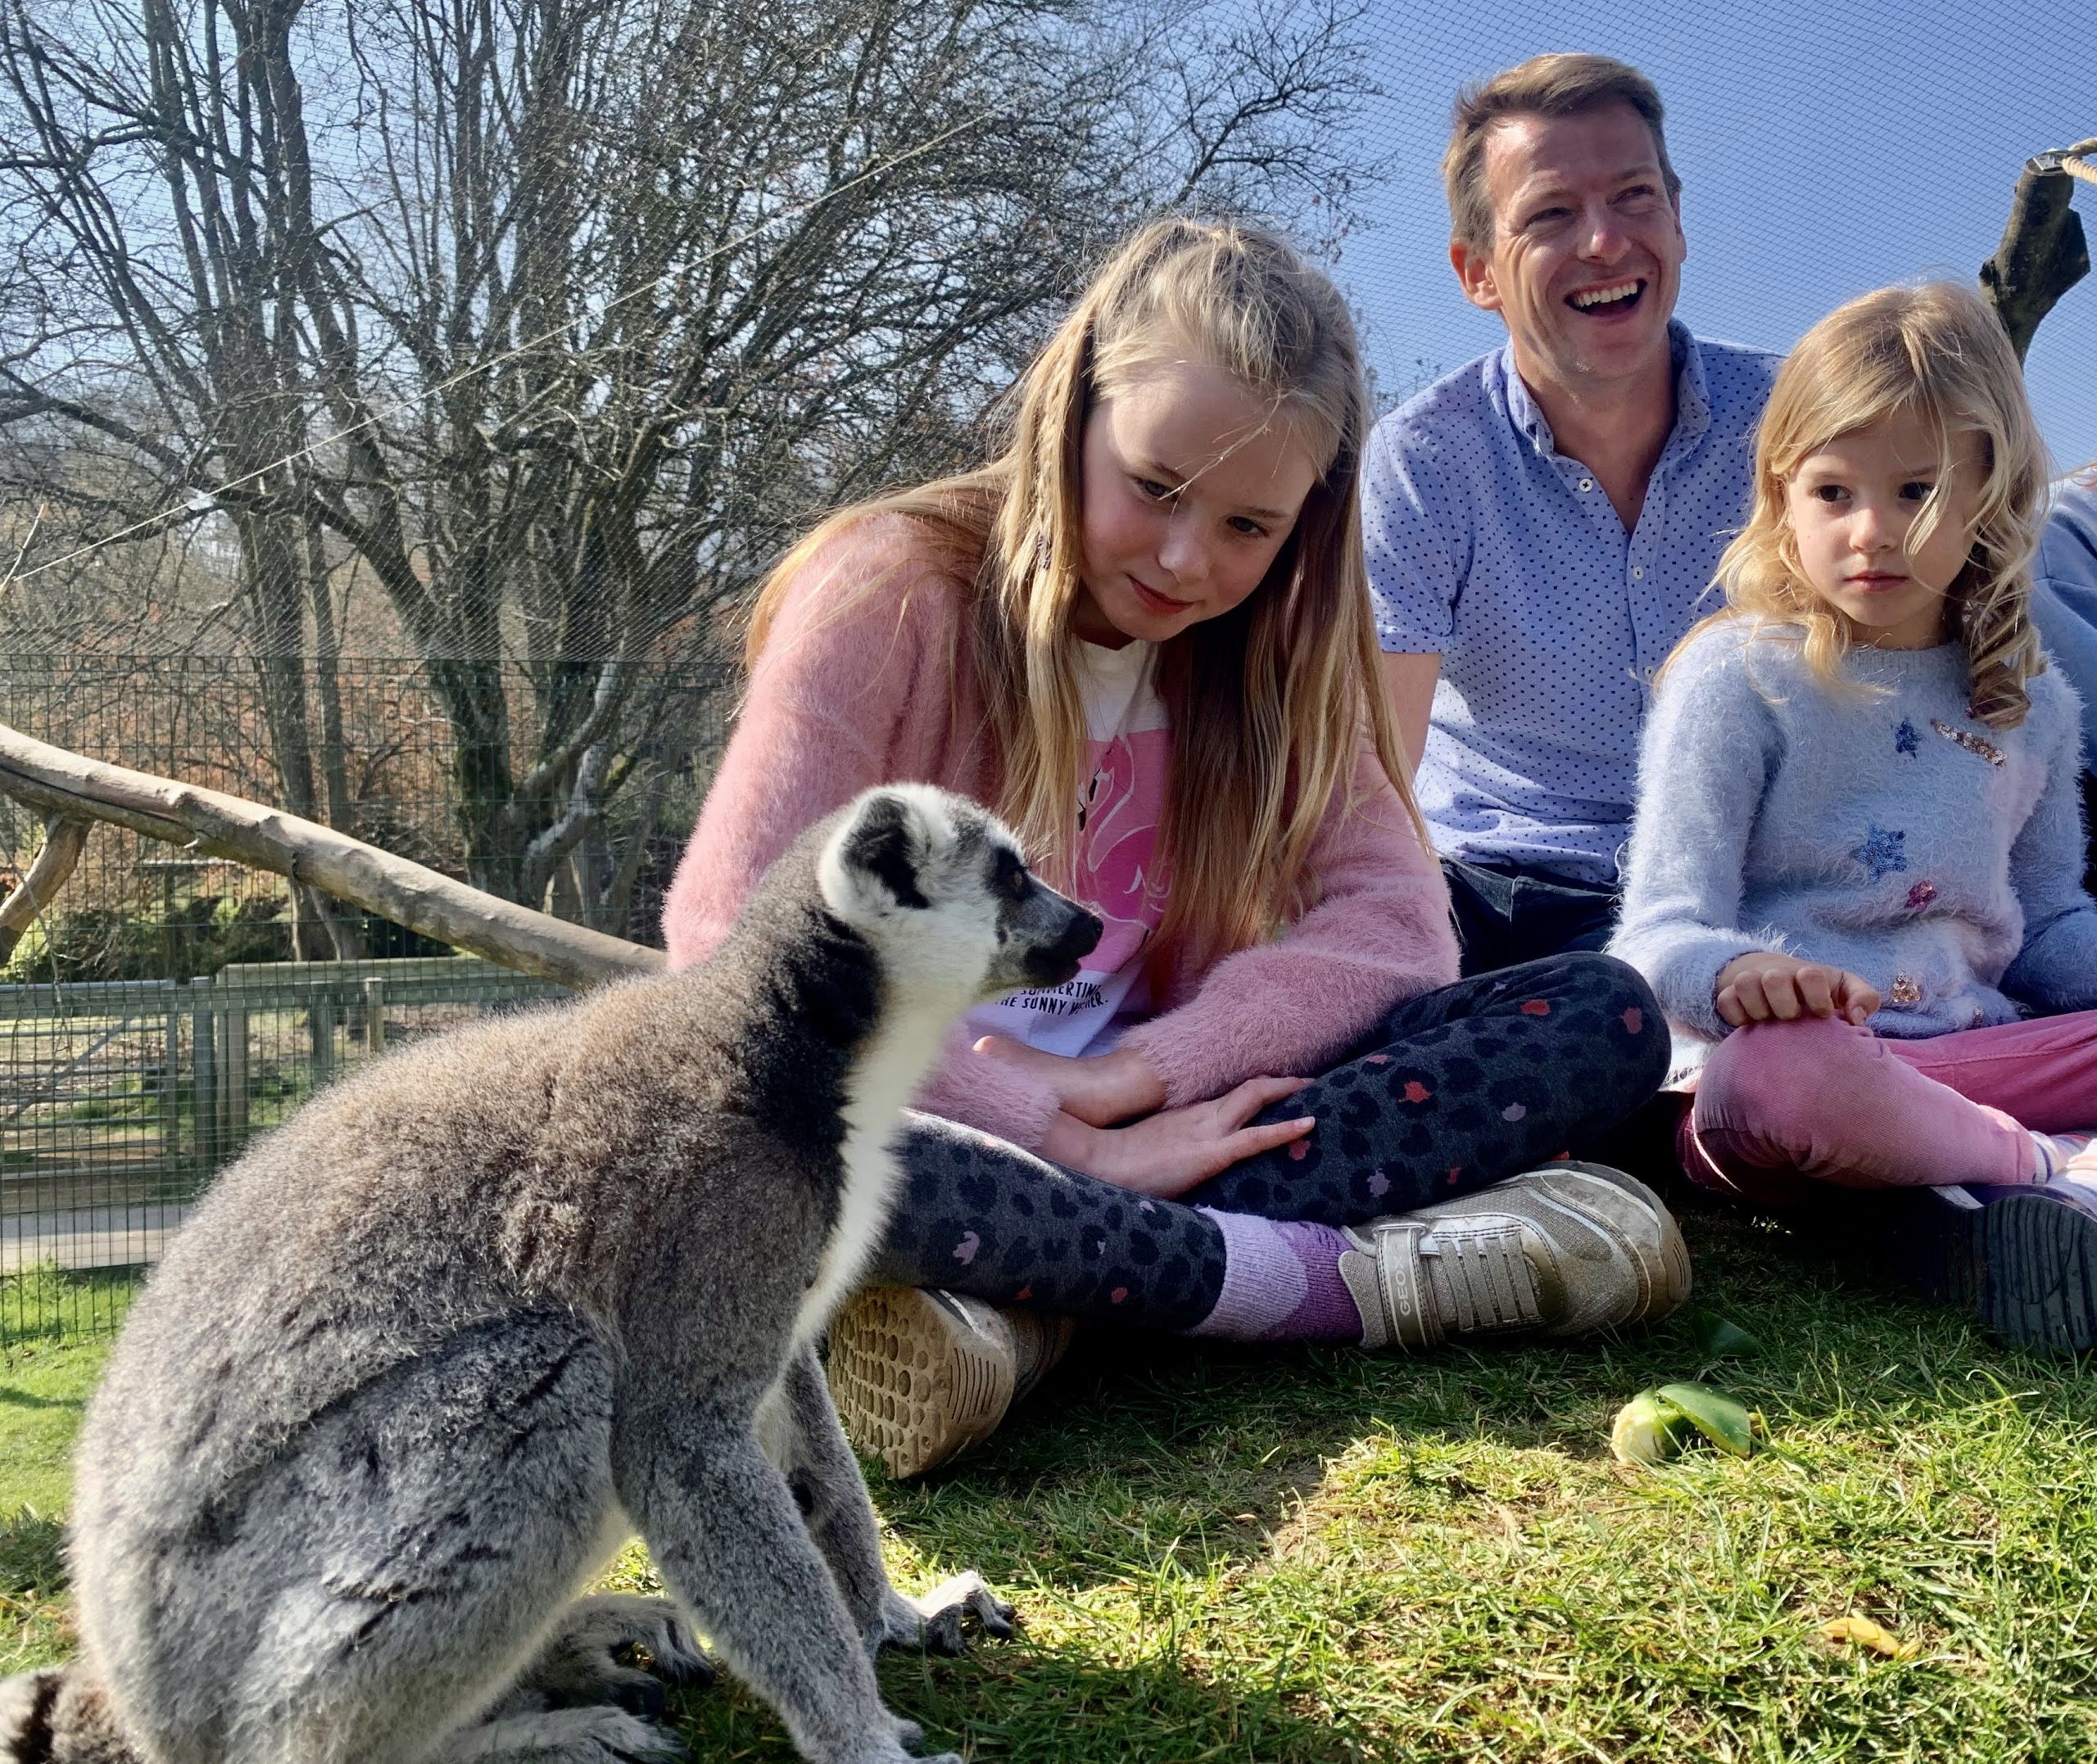 Get set for animal experiences - Beale Wildlife Park and Gardens